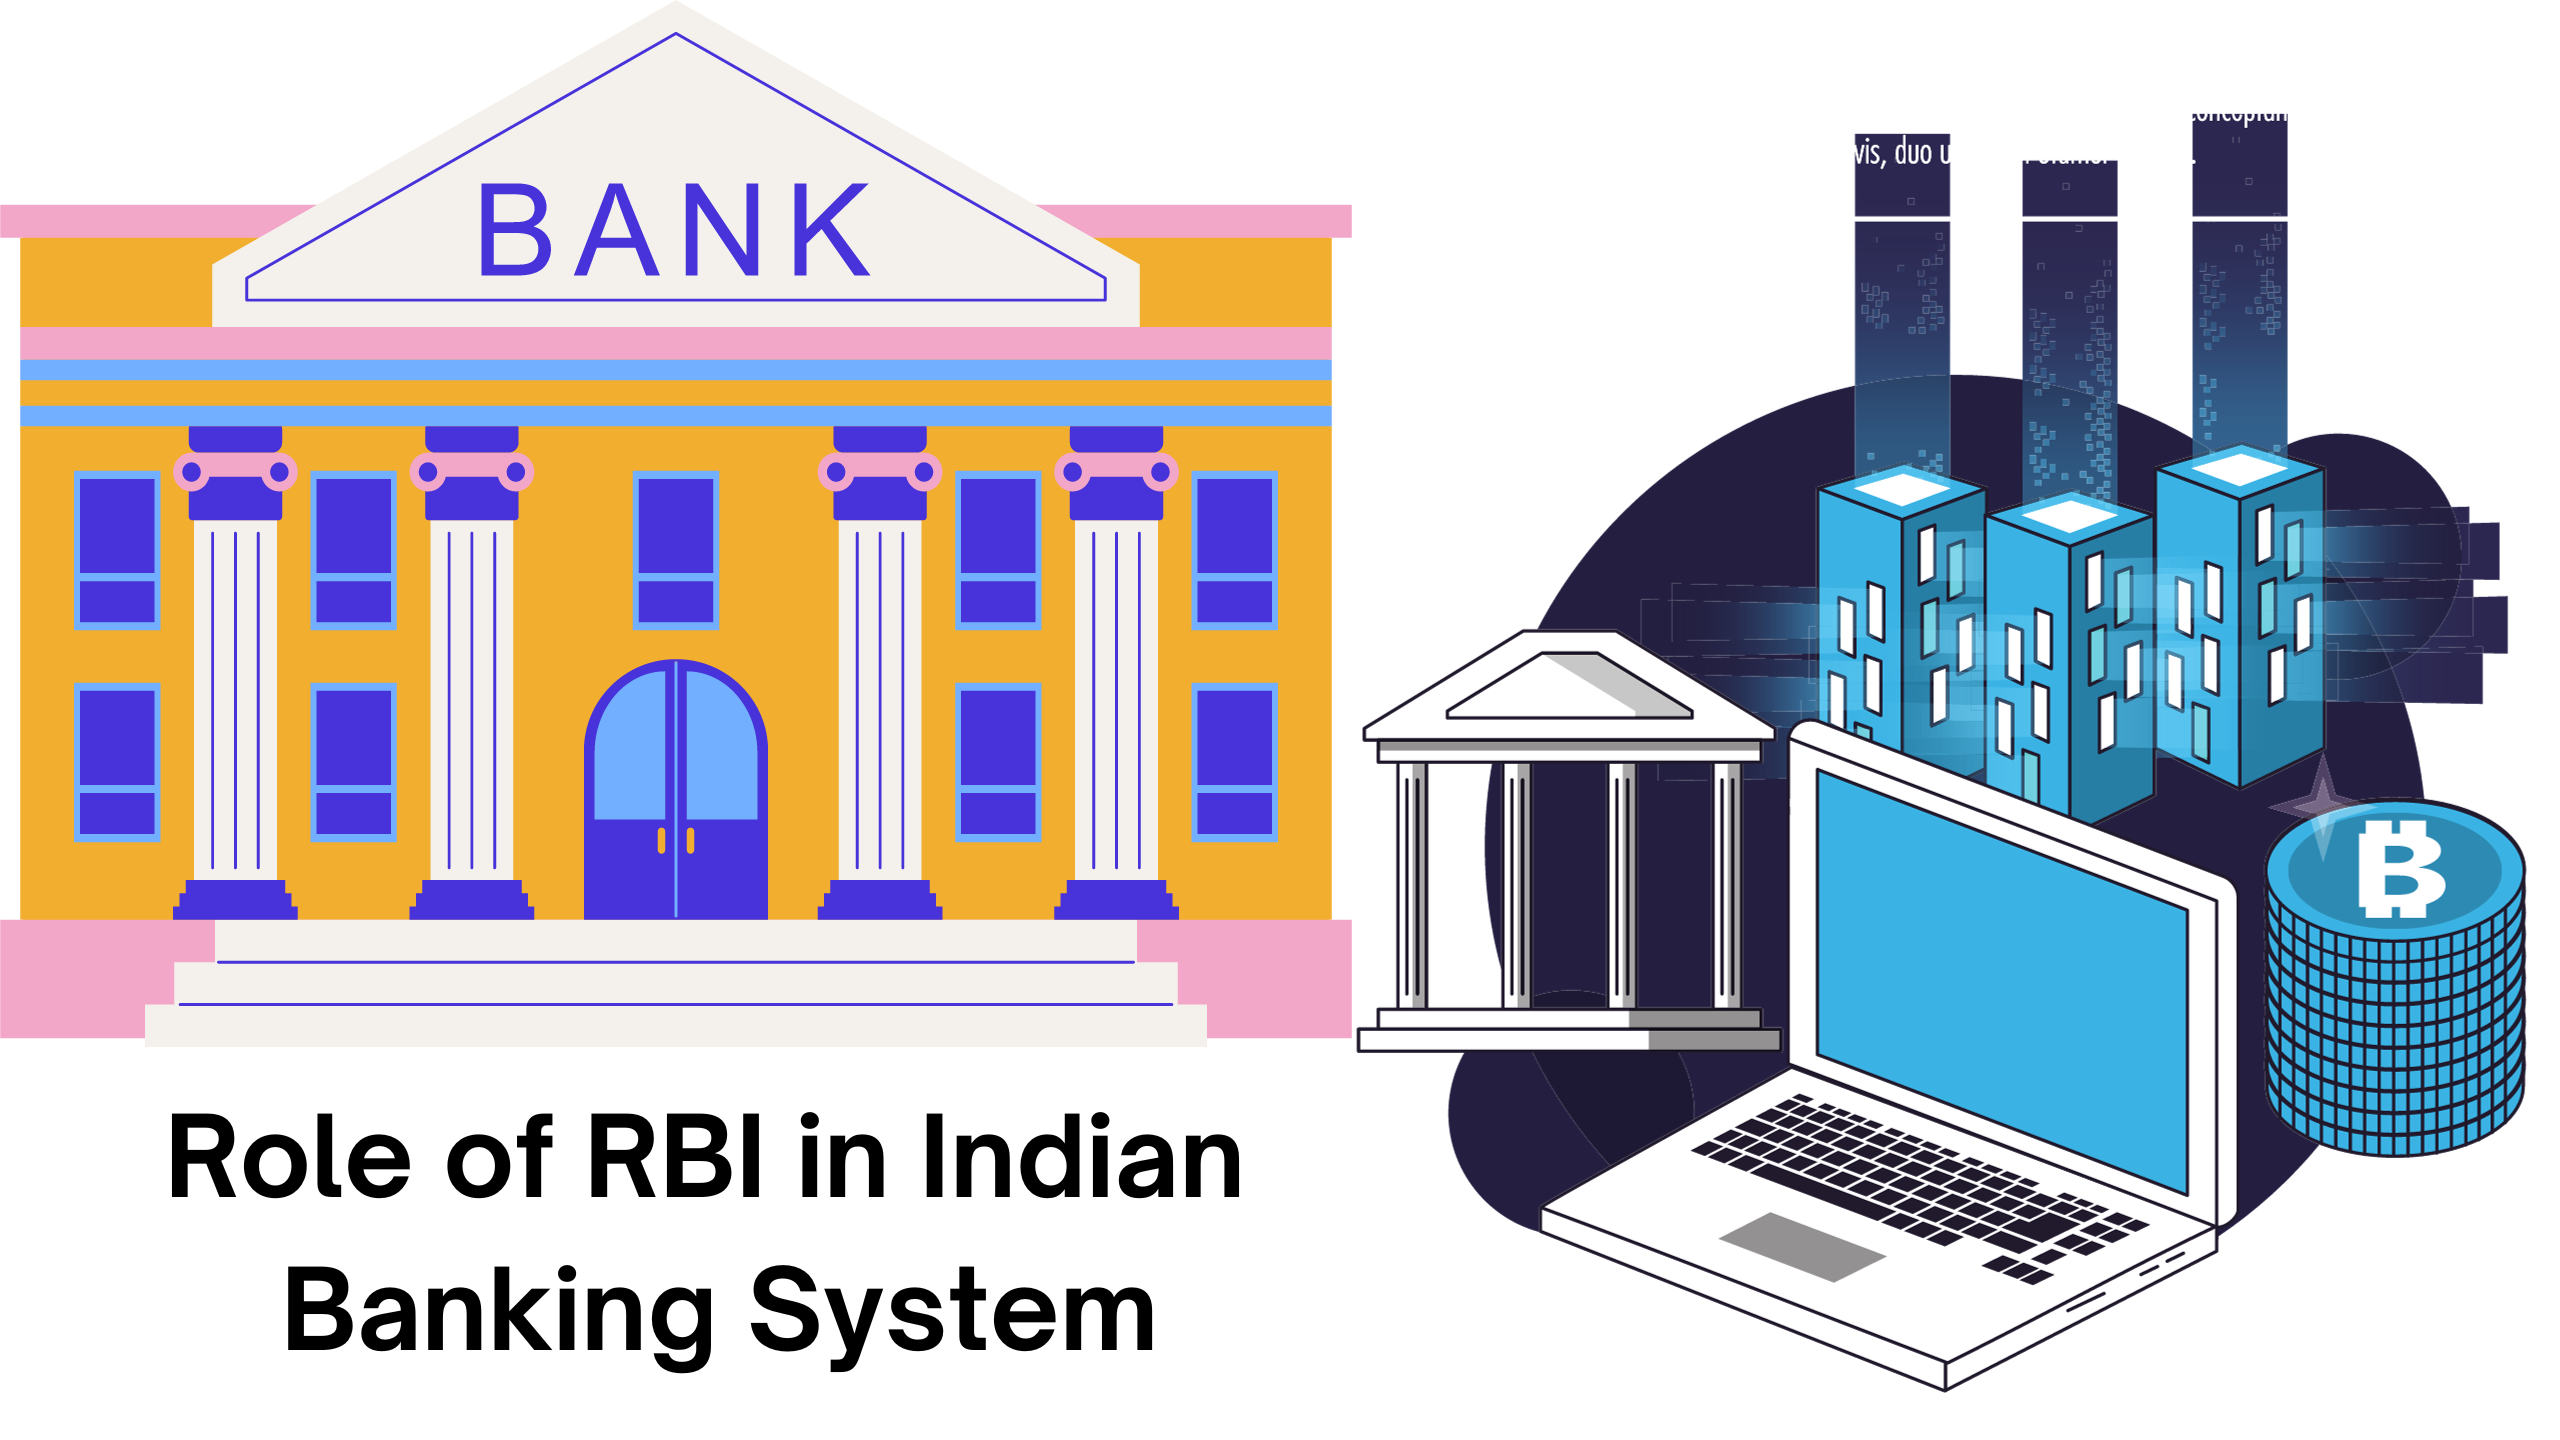 Role of RBI in Indian Banking System